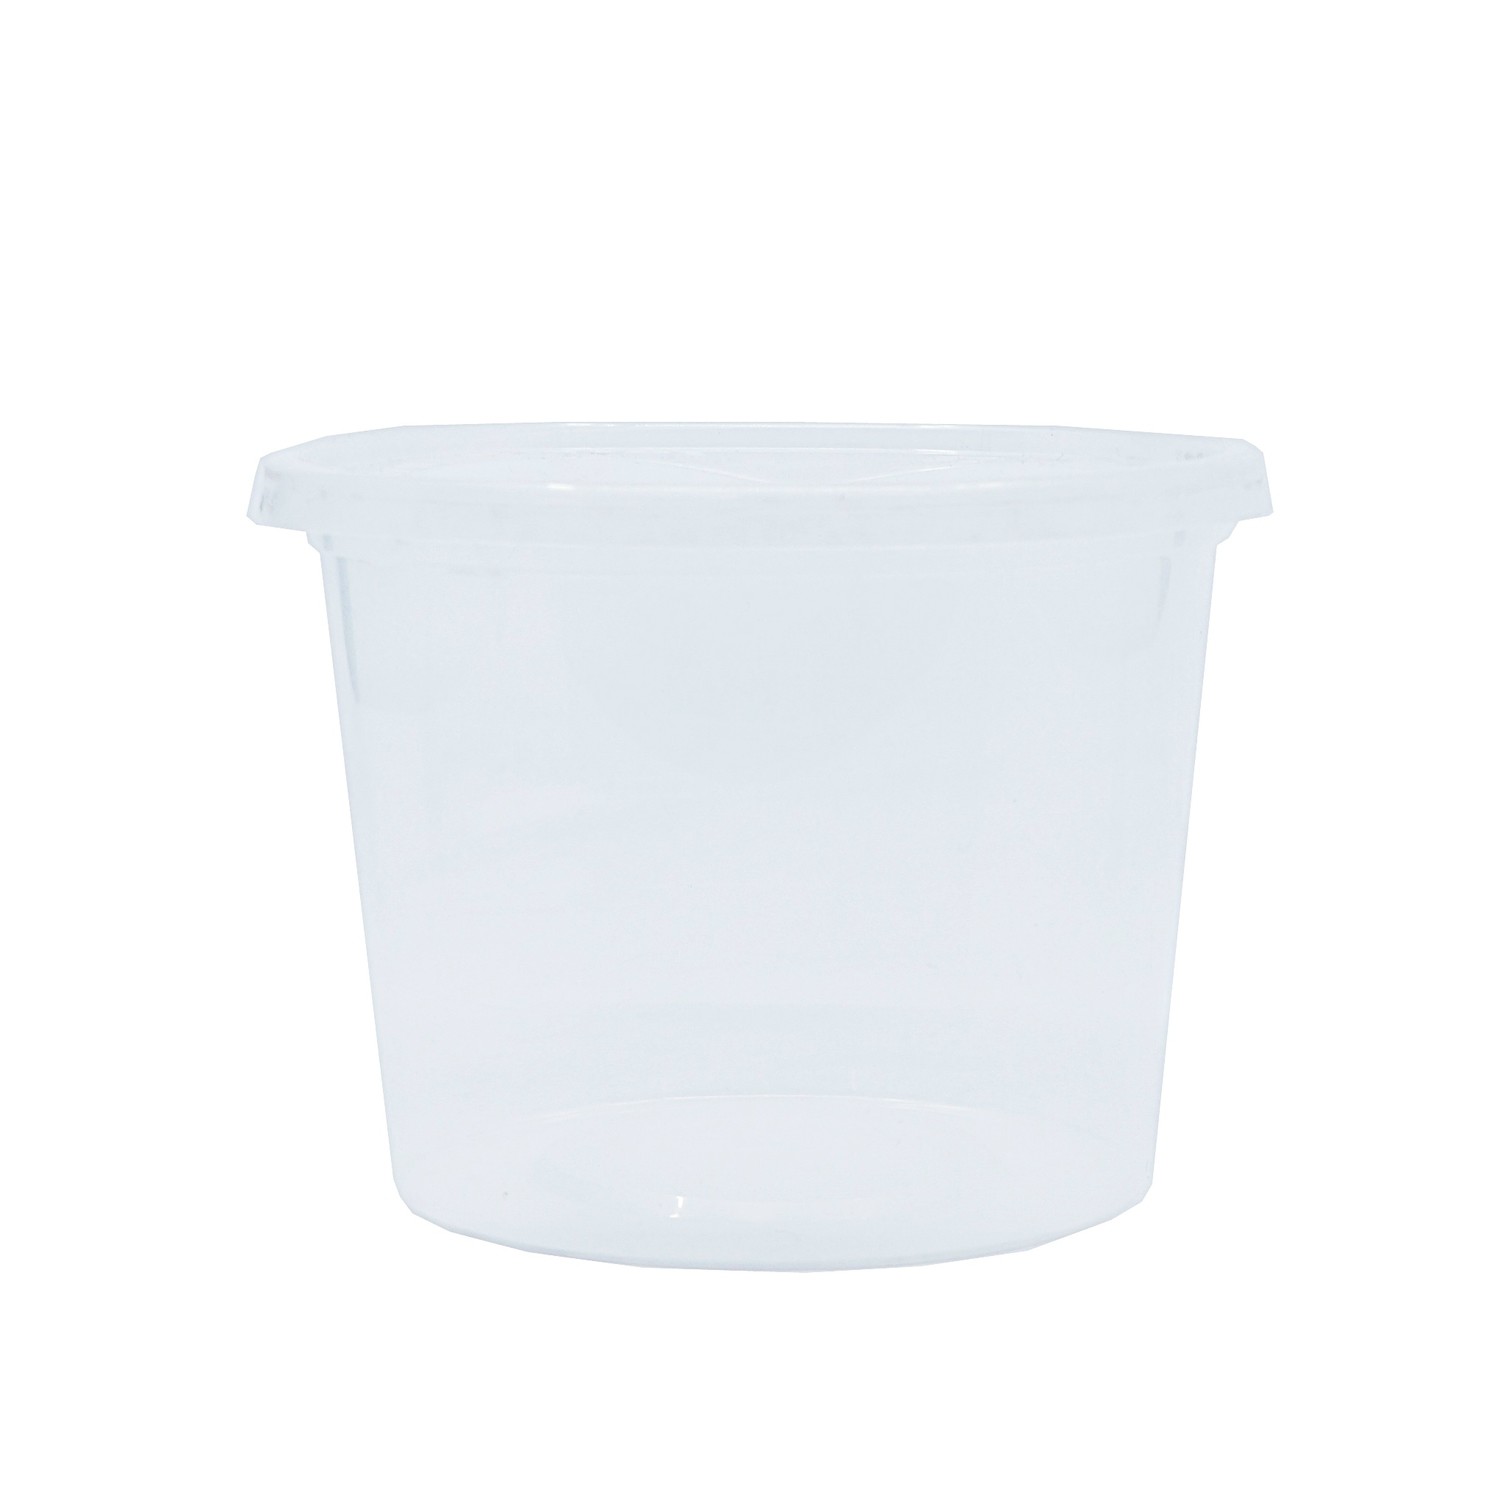 650ml, Round Microwaveable Container